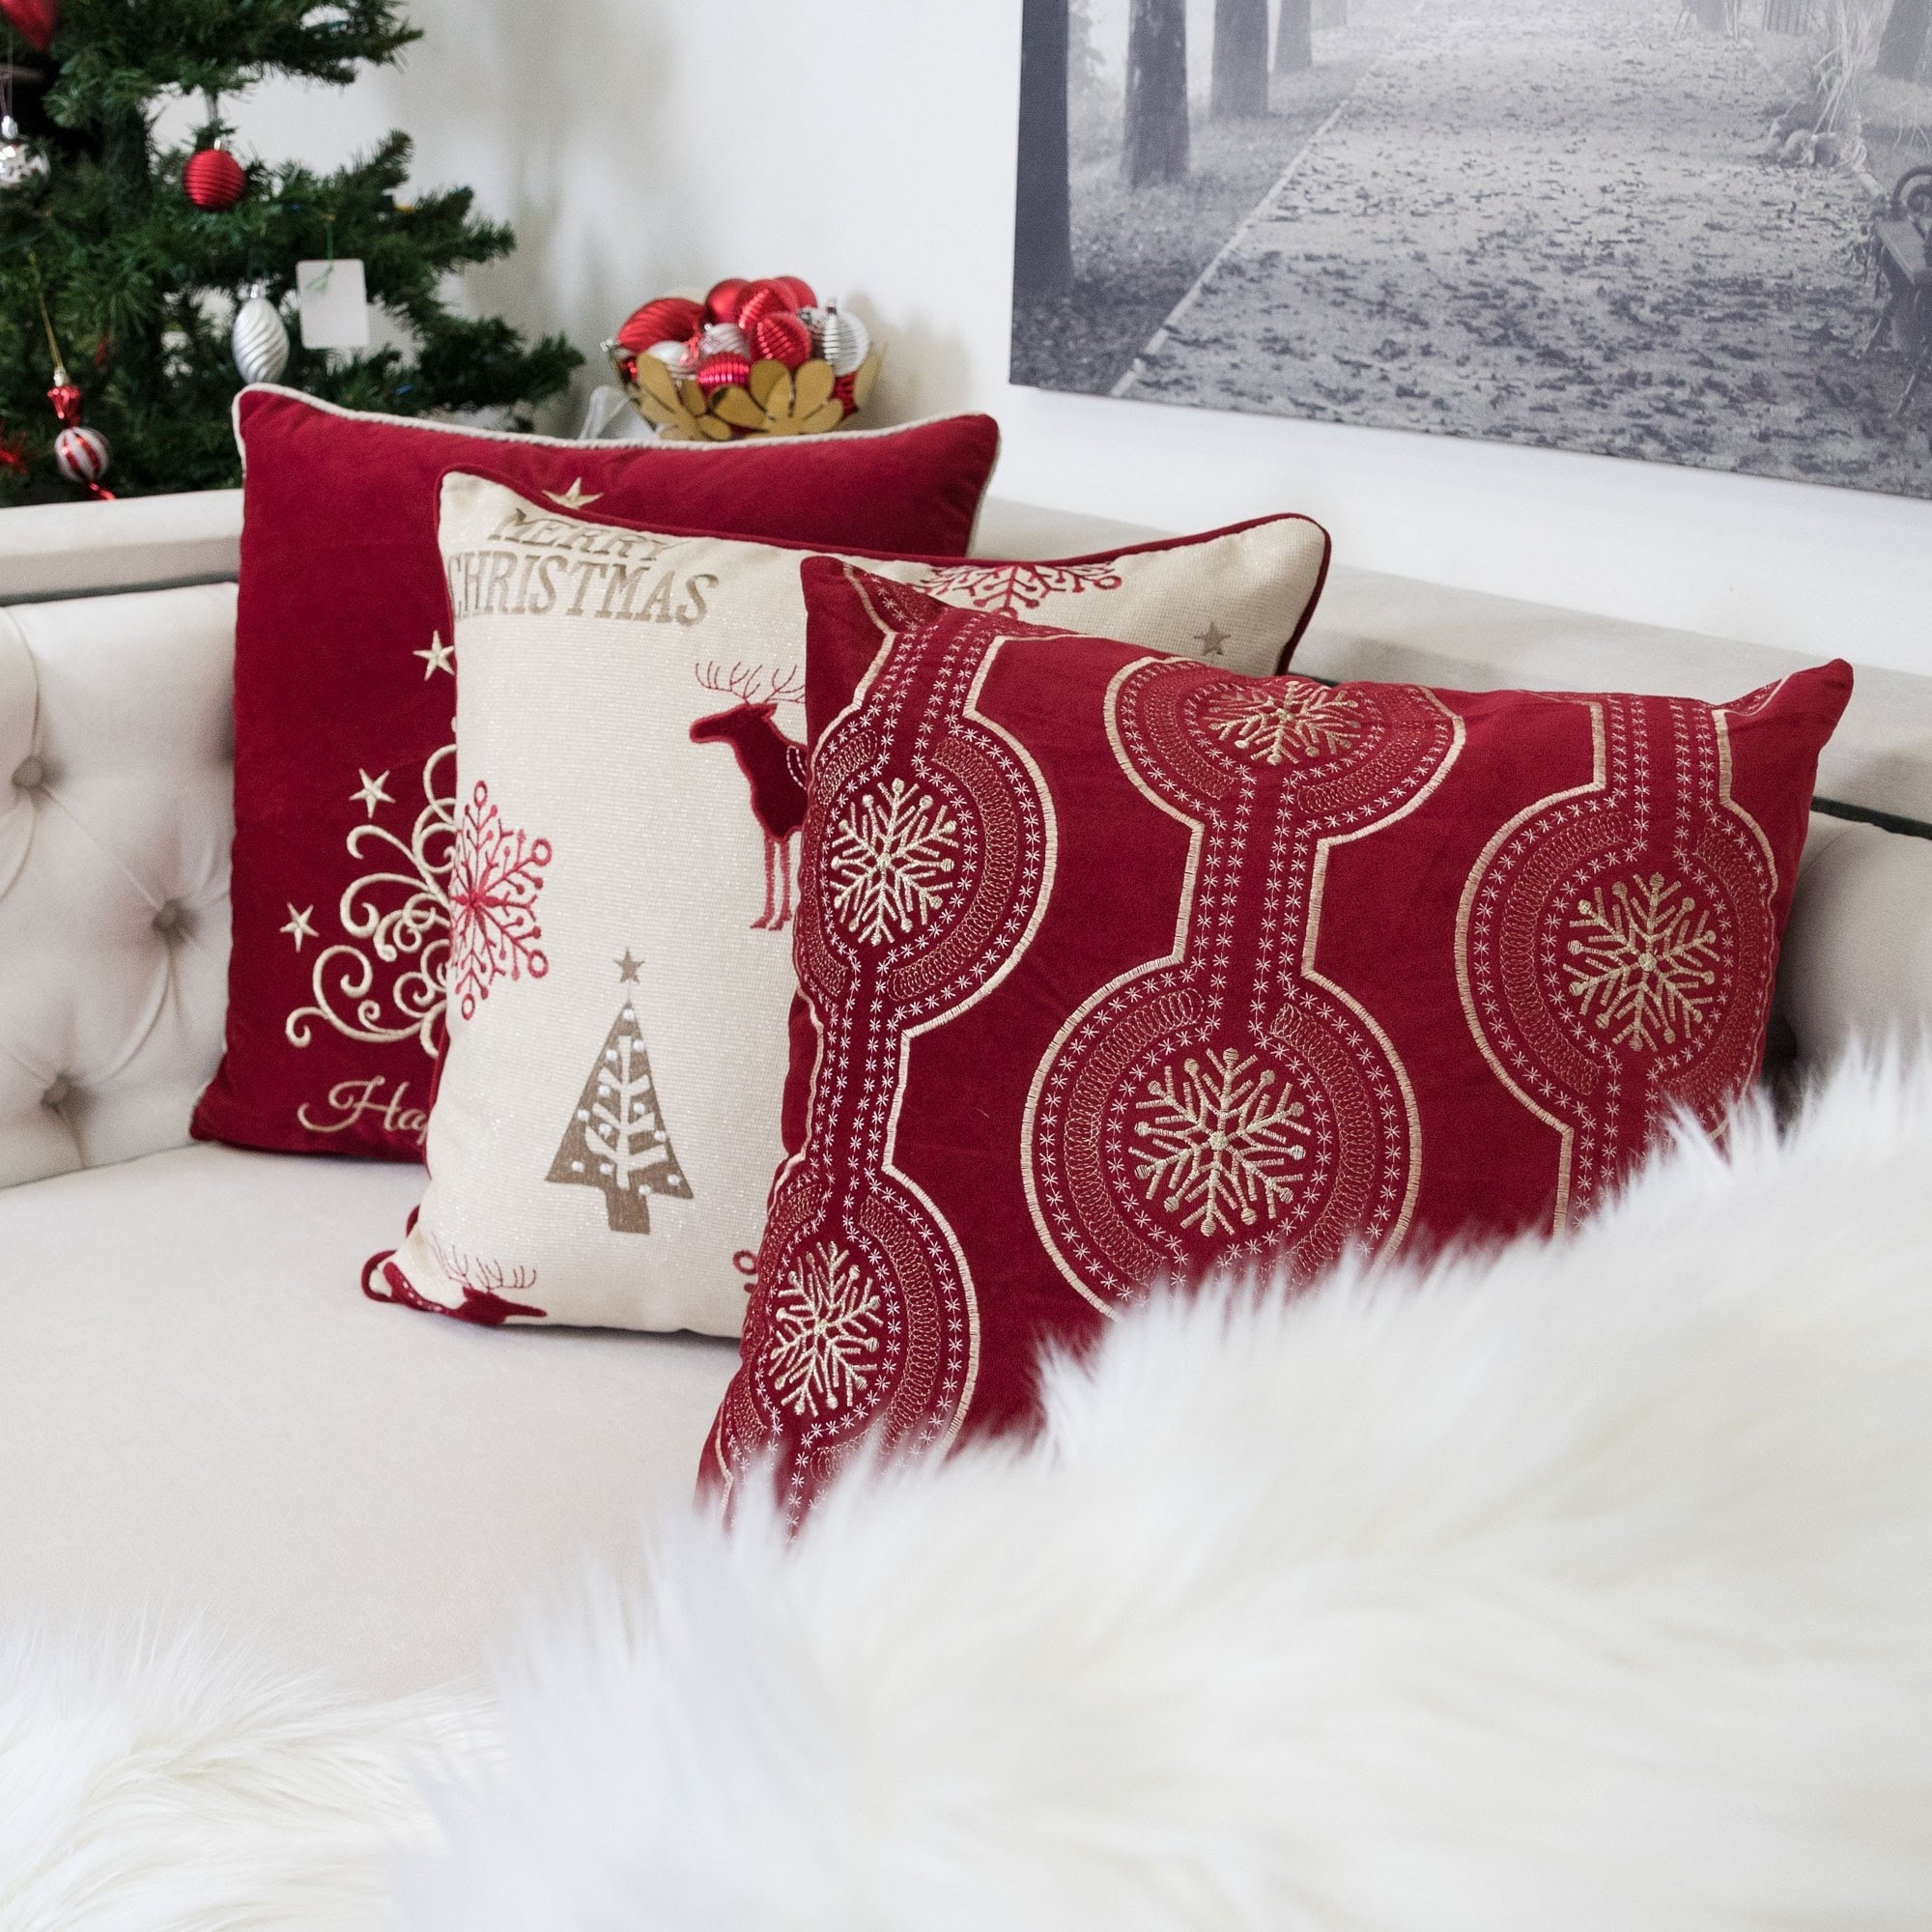 https://ak1.ostkcdn.com/images/products/is/images/direct/5f152ff20c534e4d03dc7e74dc1e7141aeefd4ea/Lydia-Christmas-Holiday-Oversized-Pillow-with-Insert.jpg